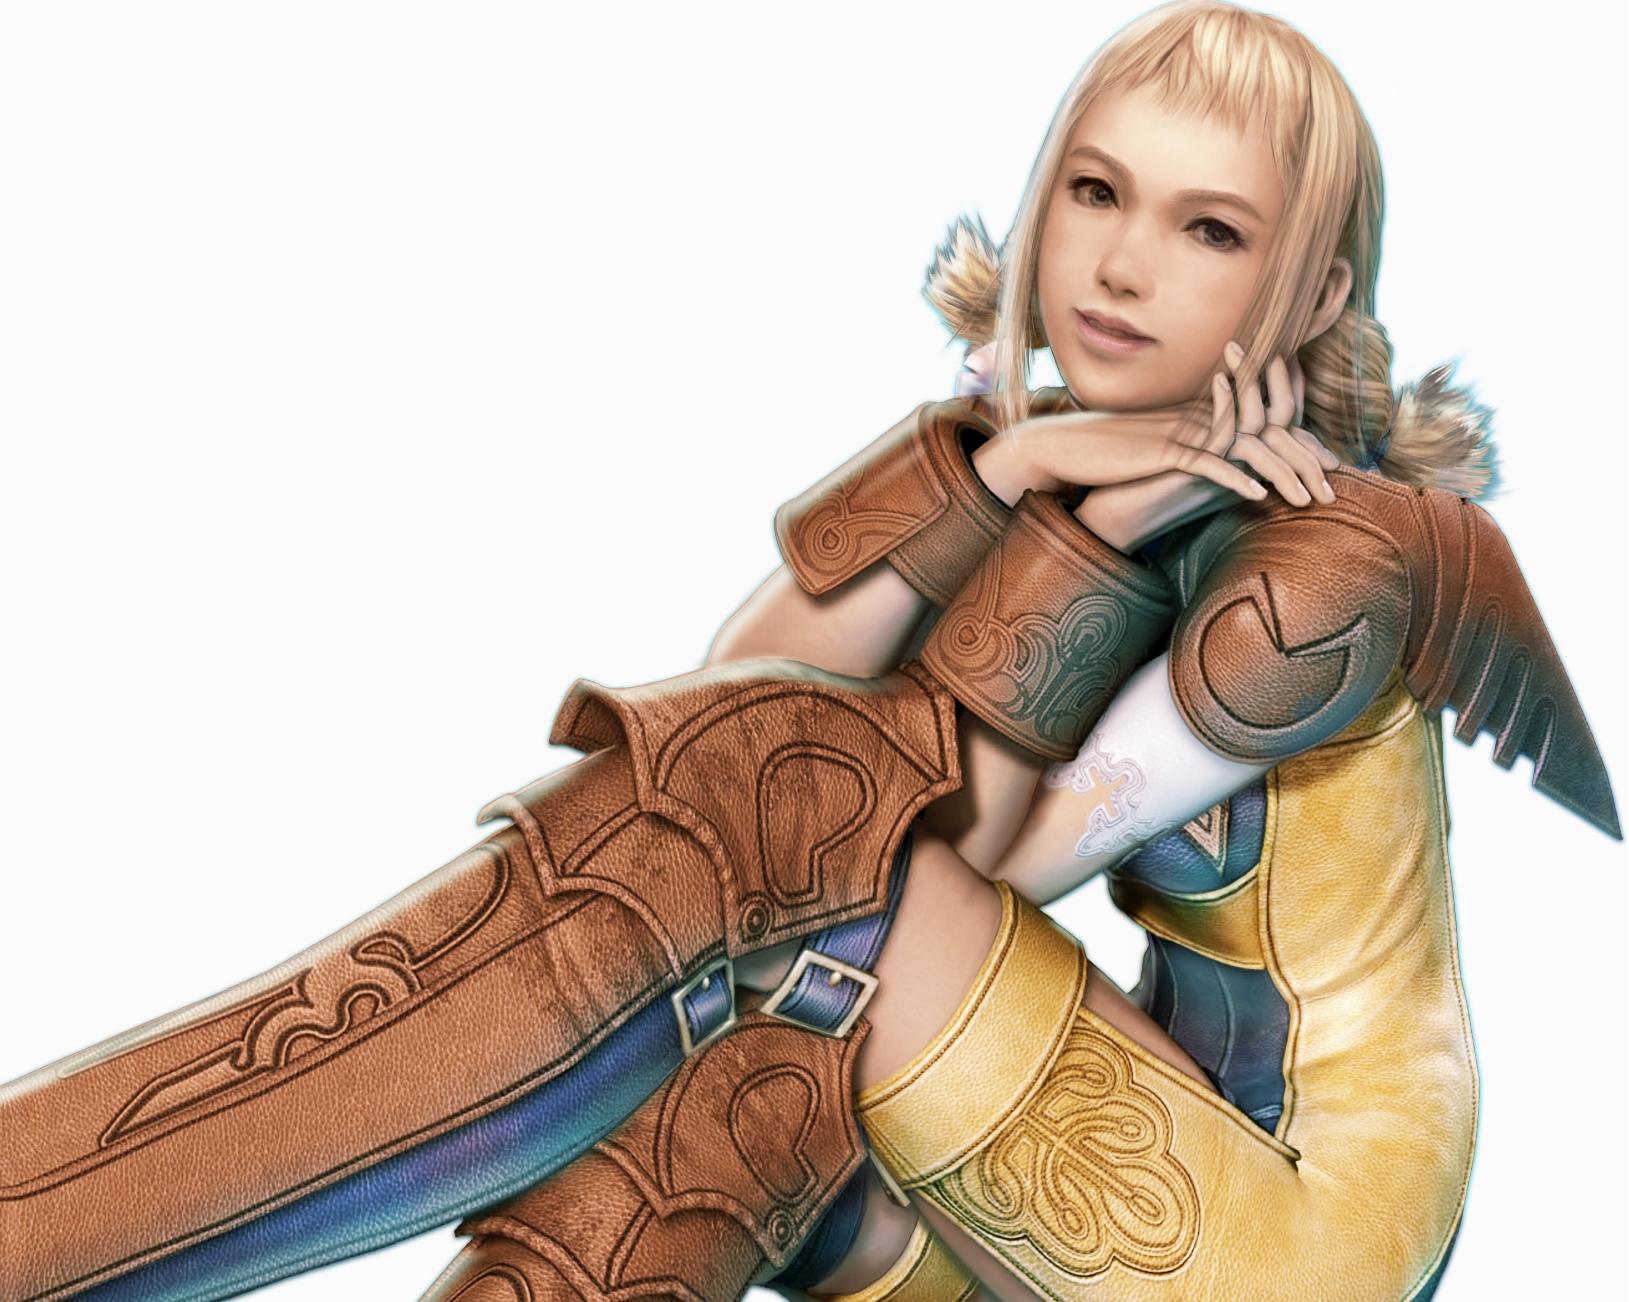 Image Final Fantasy Final Fantasy XII Wearing boots vdeo game Games